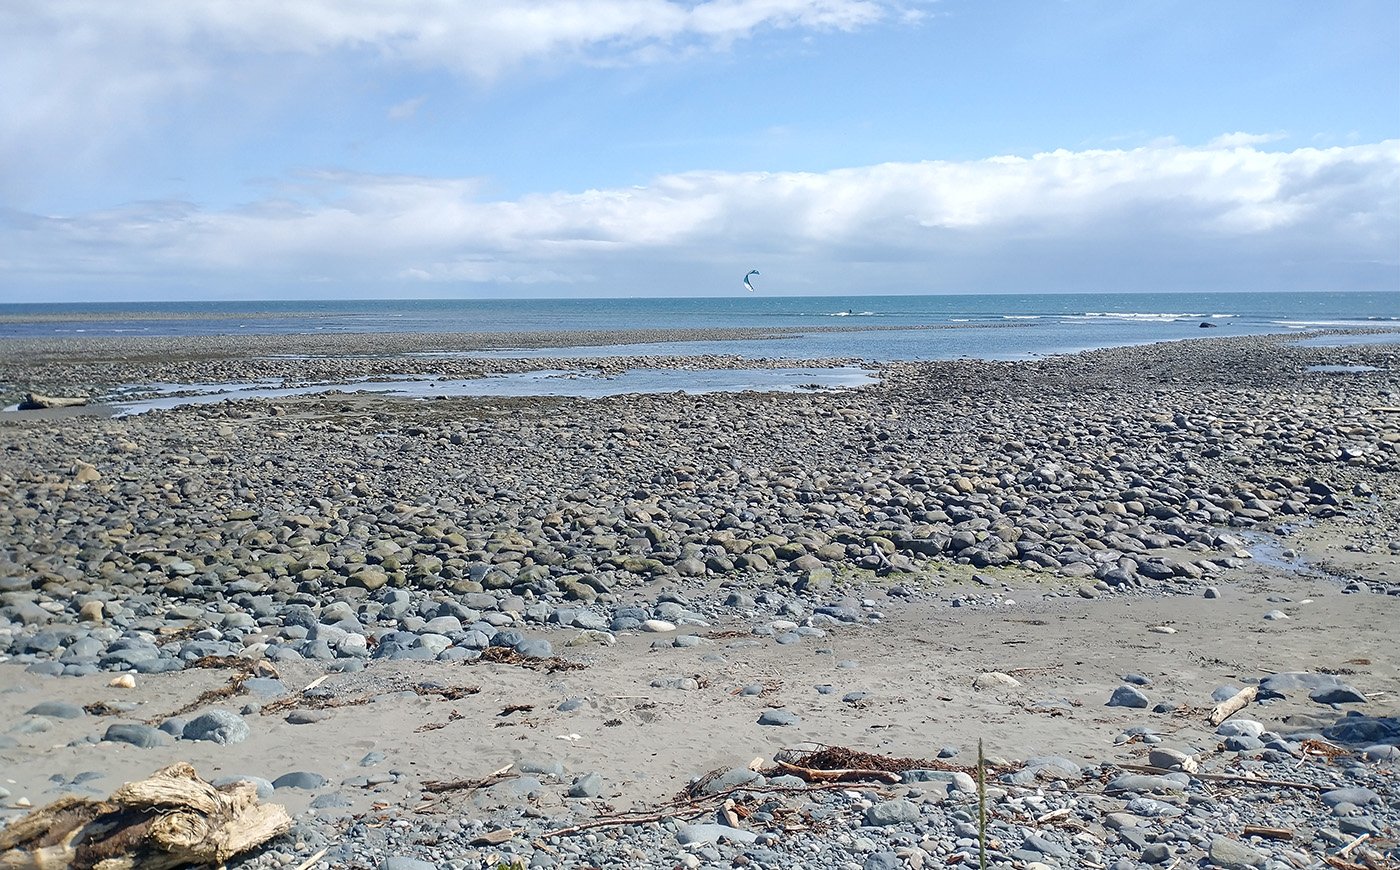  Jordan River has a few campgrounds and these long rocky beaches. The most beautiful views on the Island can be found between Jordan River and Sooke in my opinion. 